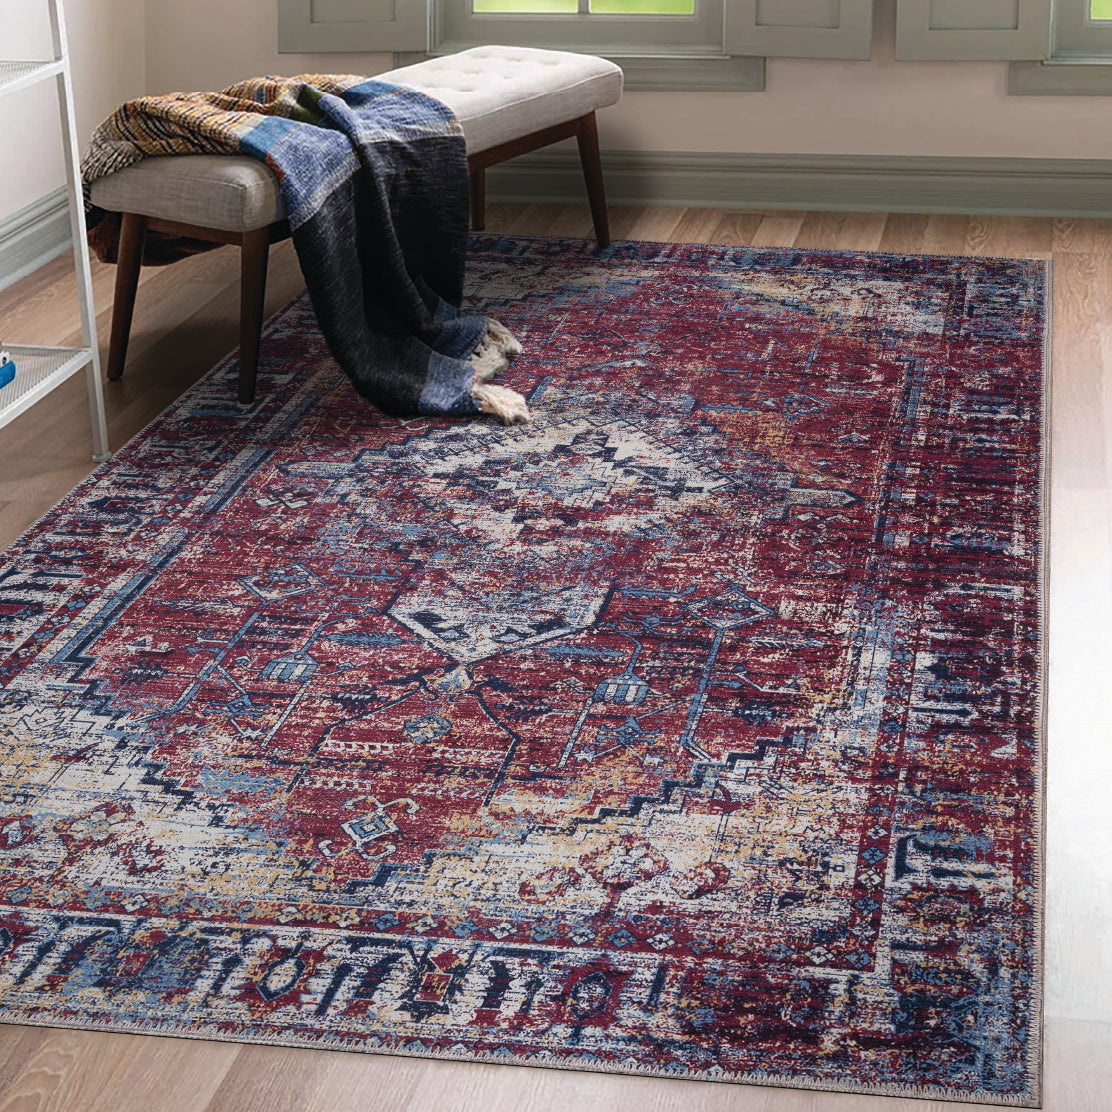 /products/narman-machine-washable-area-rug-red-red